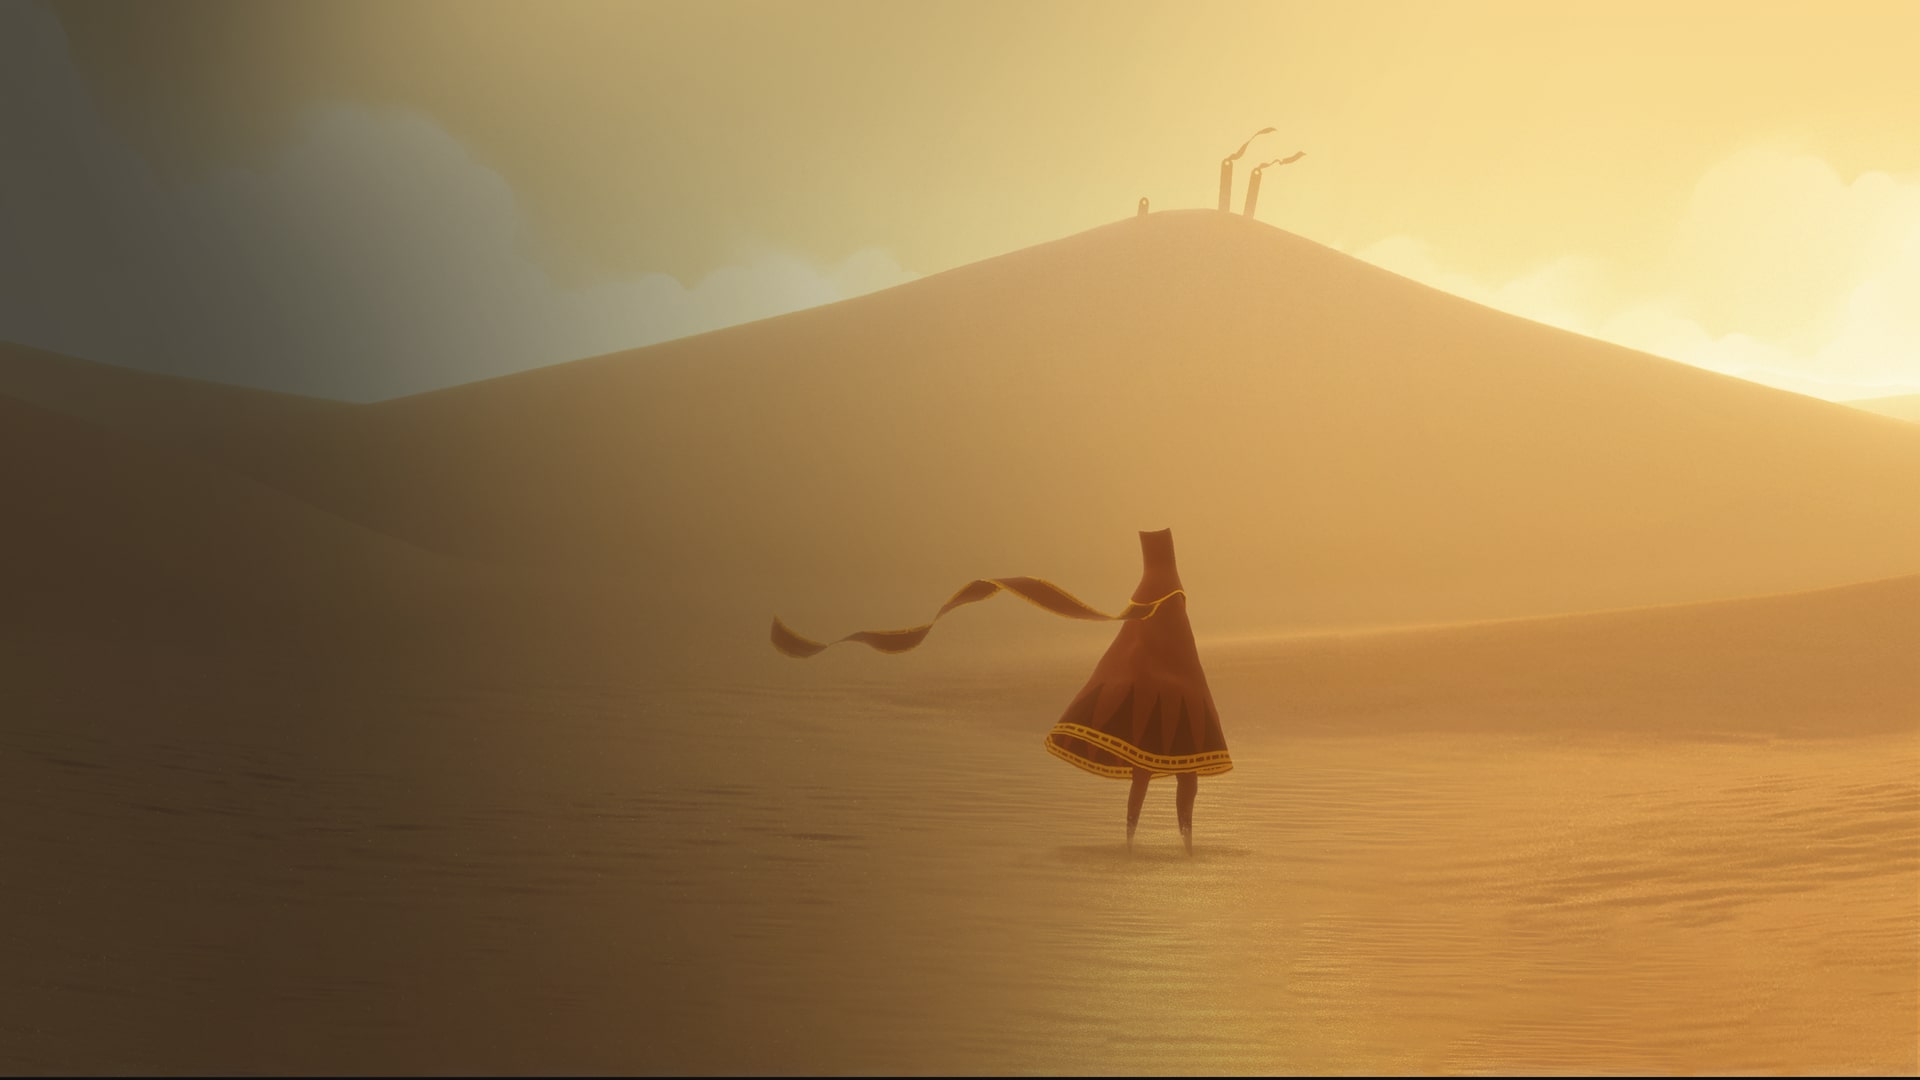 journey ps4 store